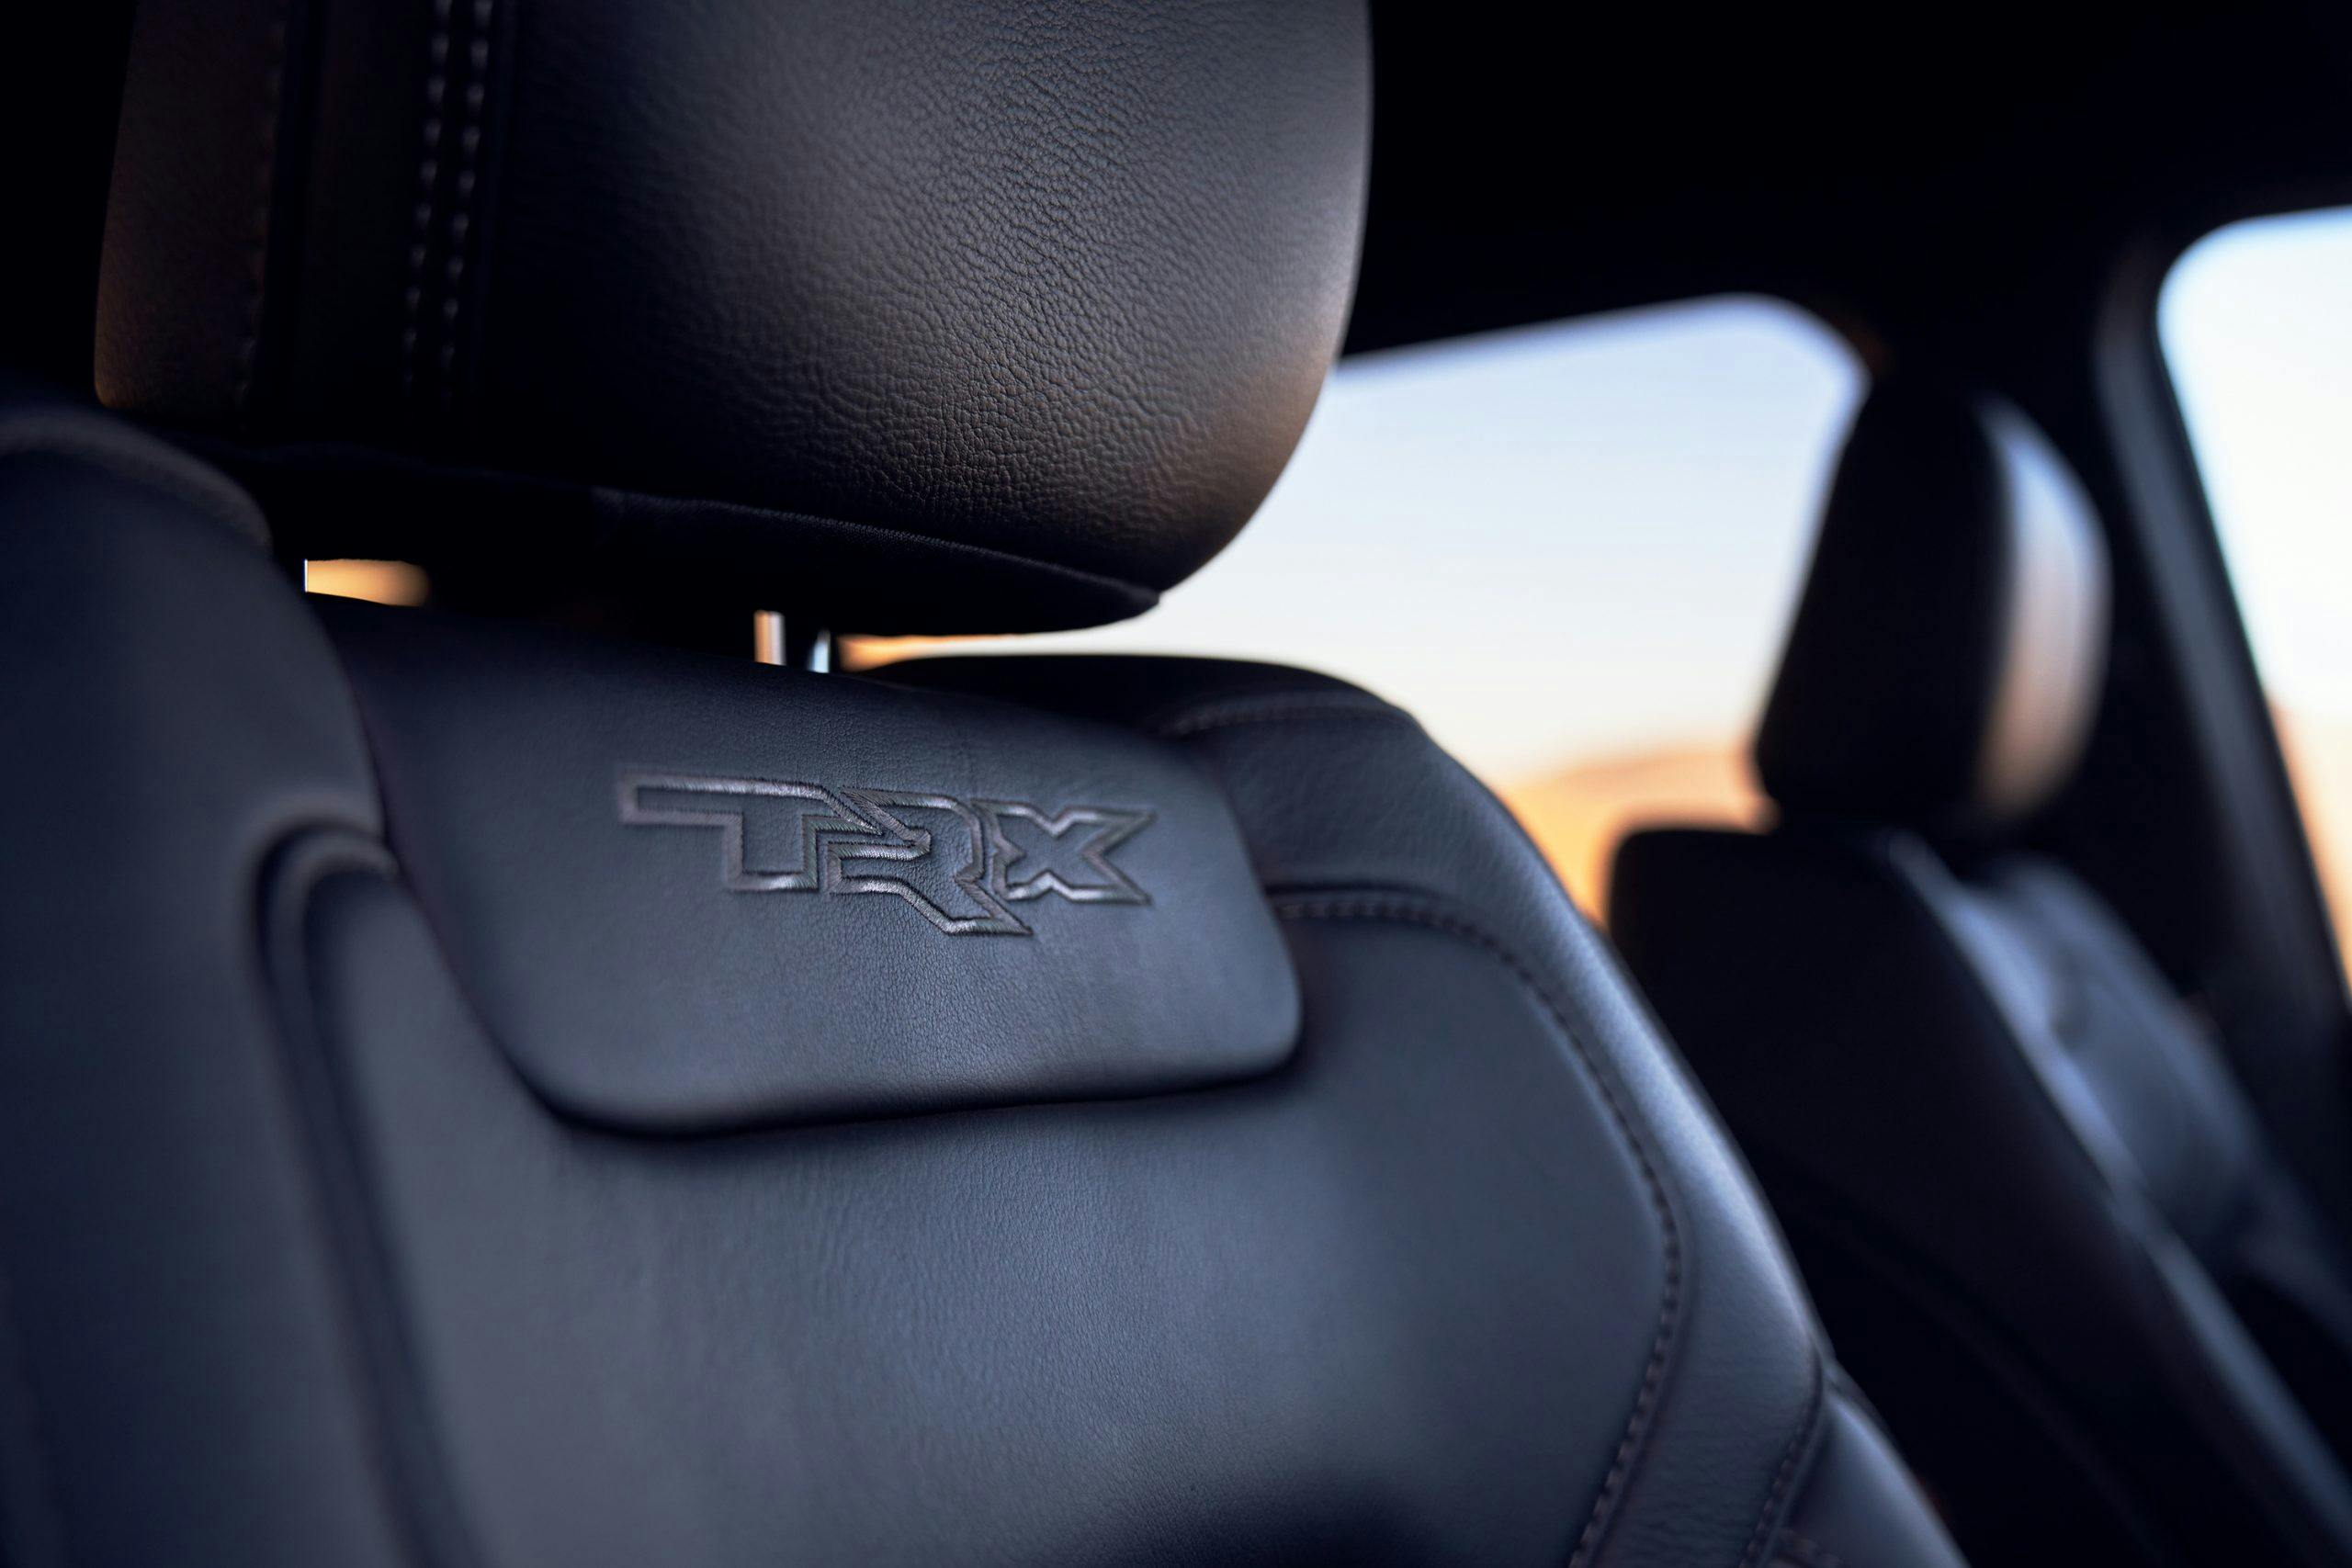 2021 Ram 1500 TRX seat embroidery detail